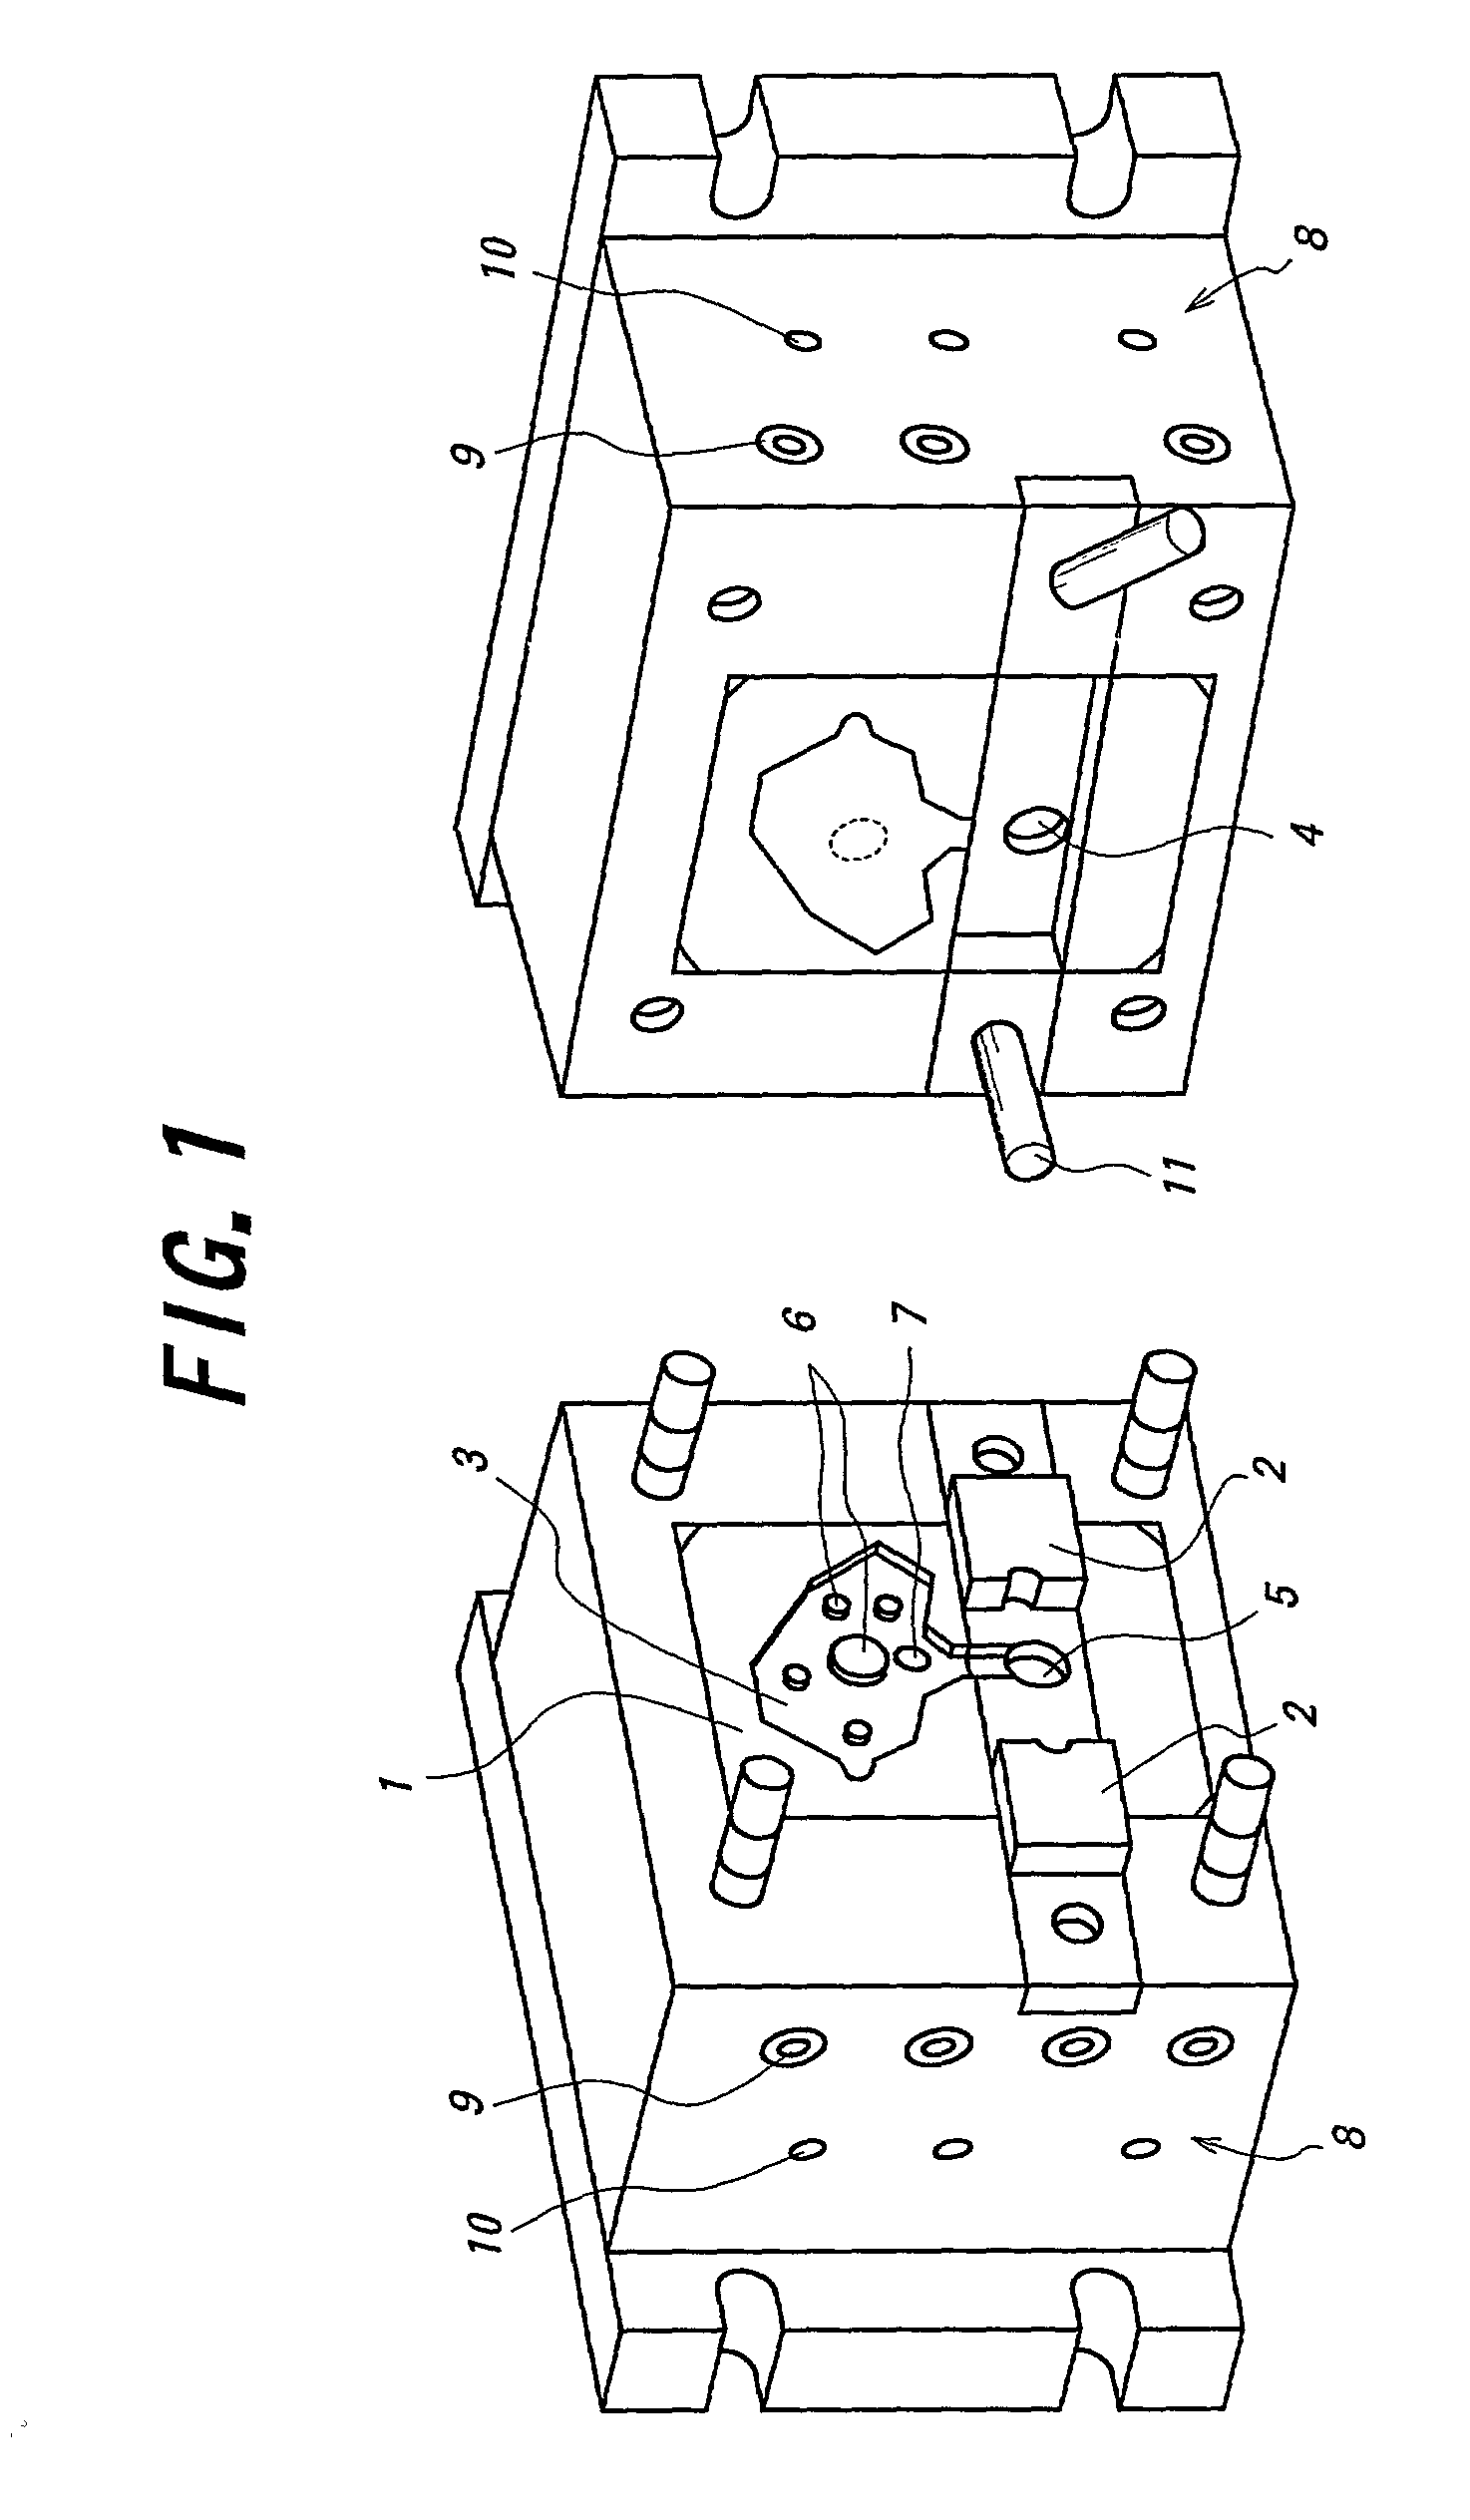 Injection mold for semi-solidified Fe alloy